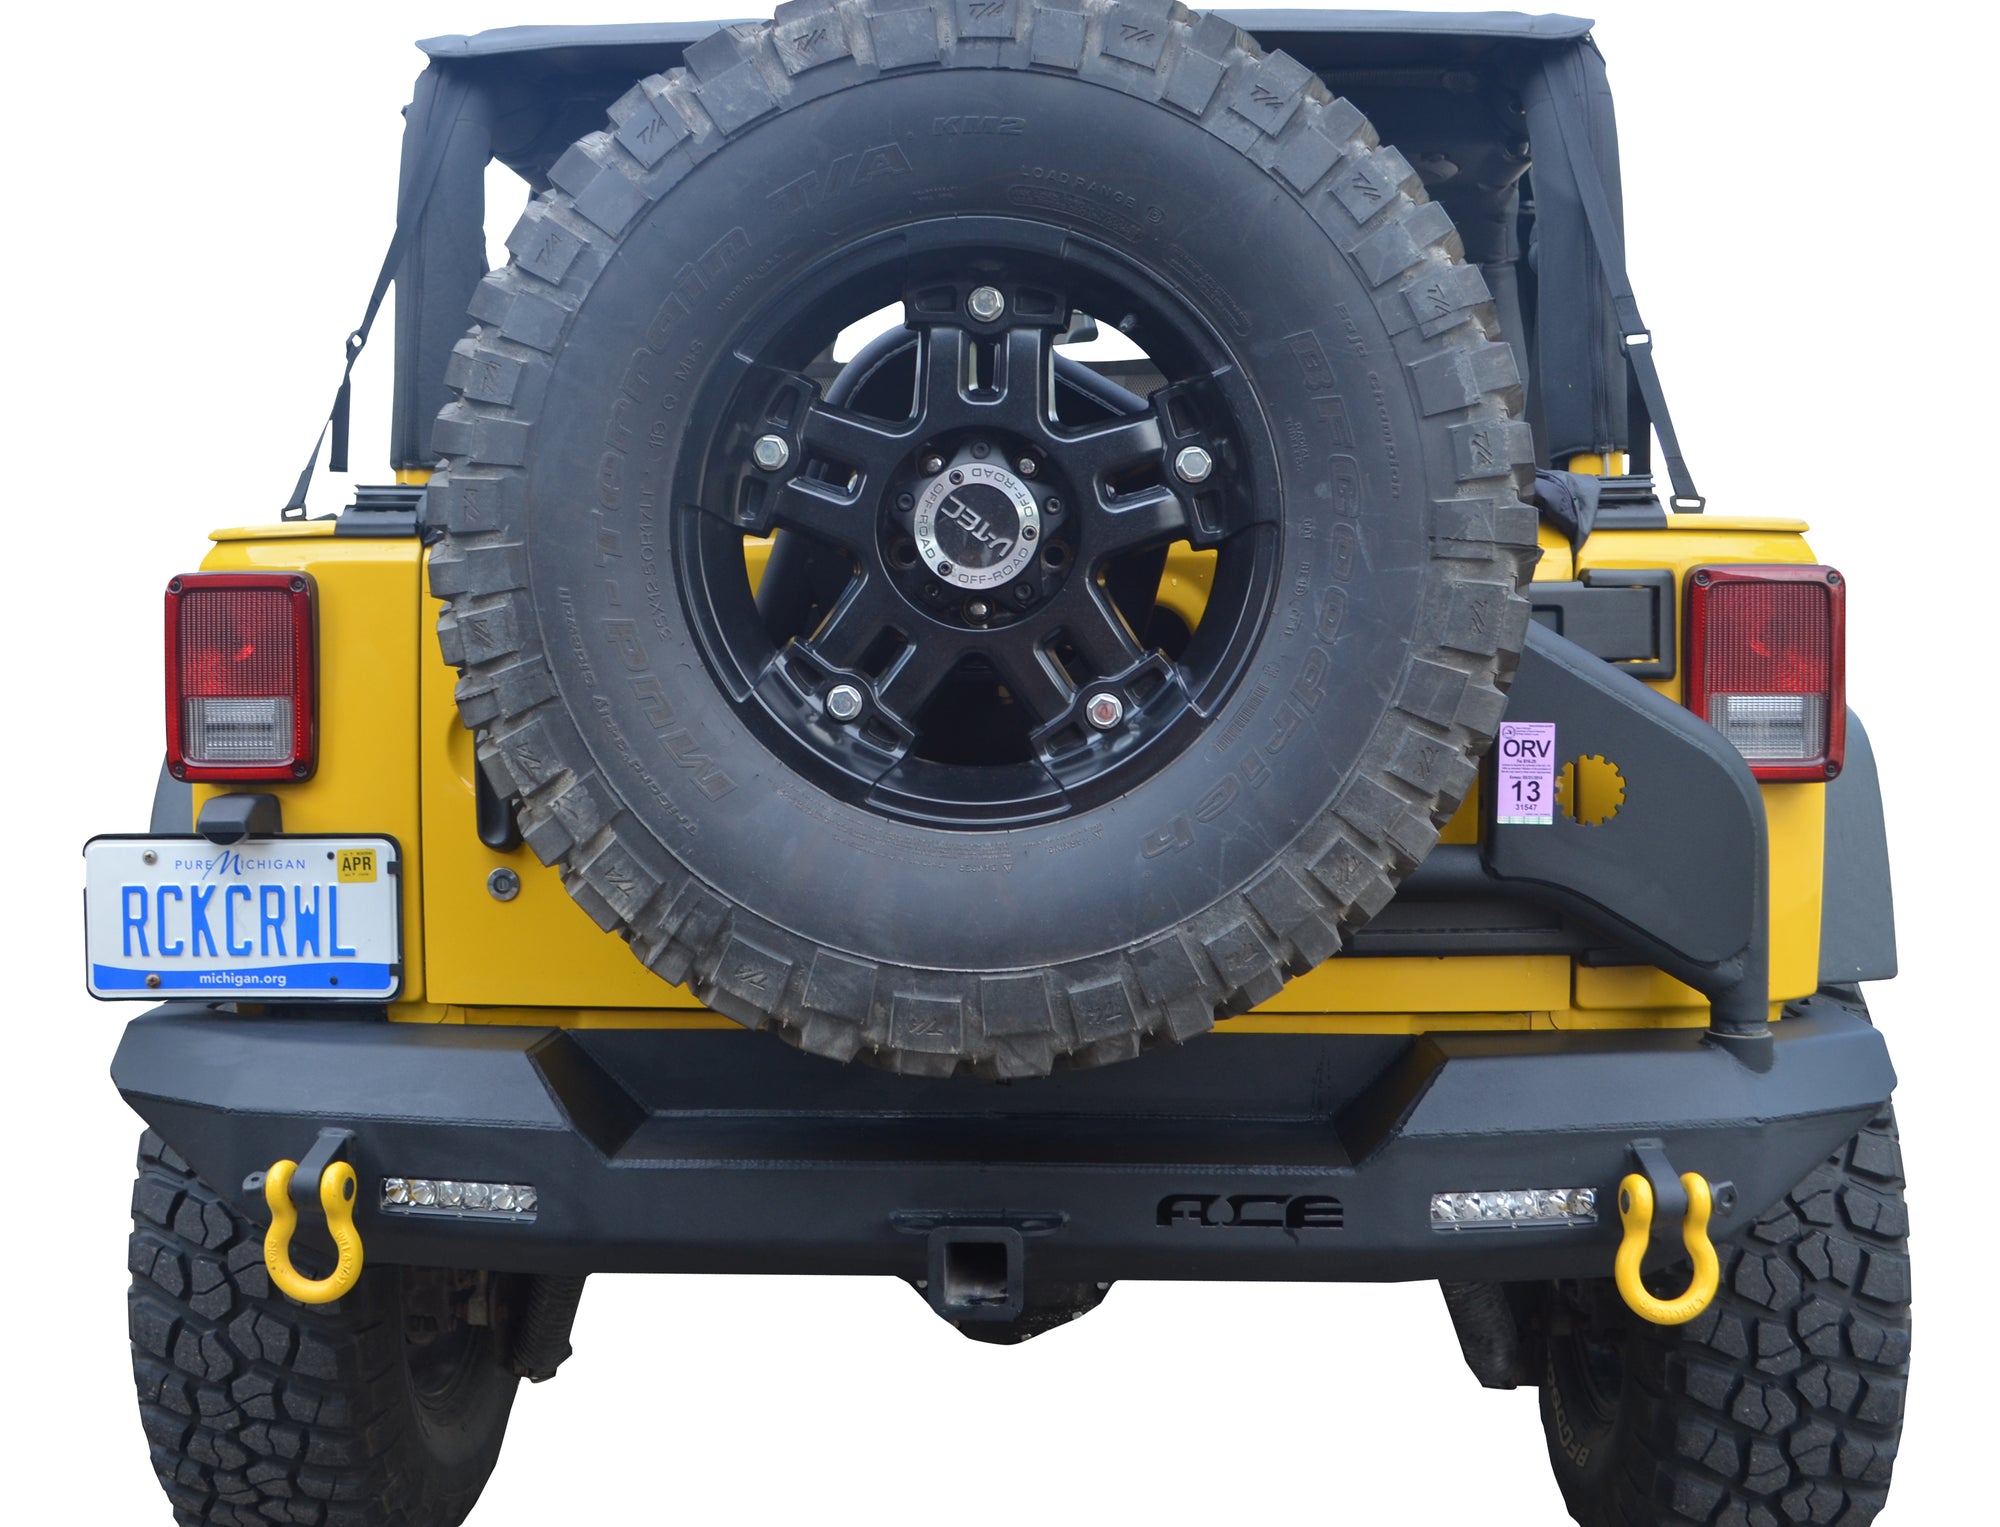 ACE JK Pro Series Rear Bumper with Tire Carrier - Ace Engineering & Fab